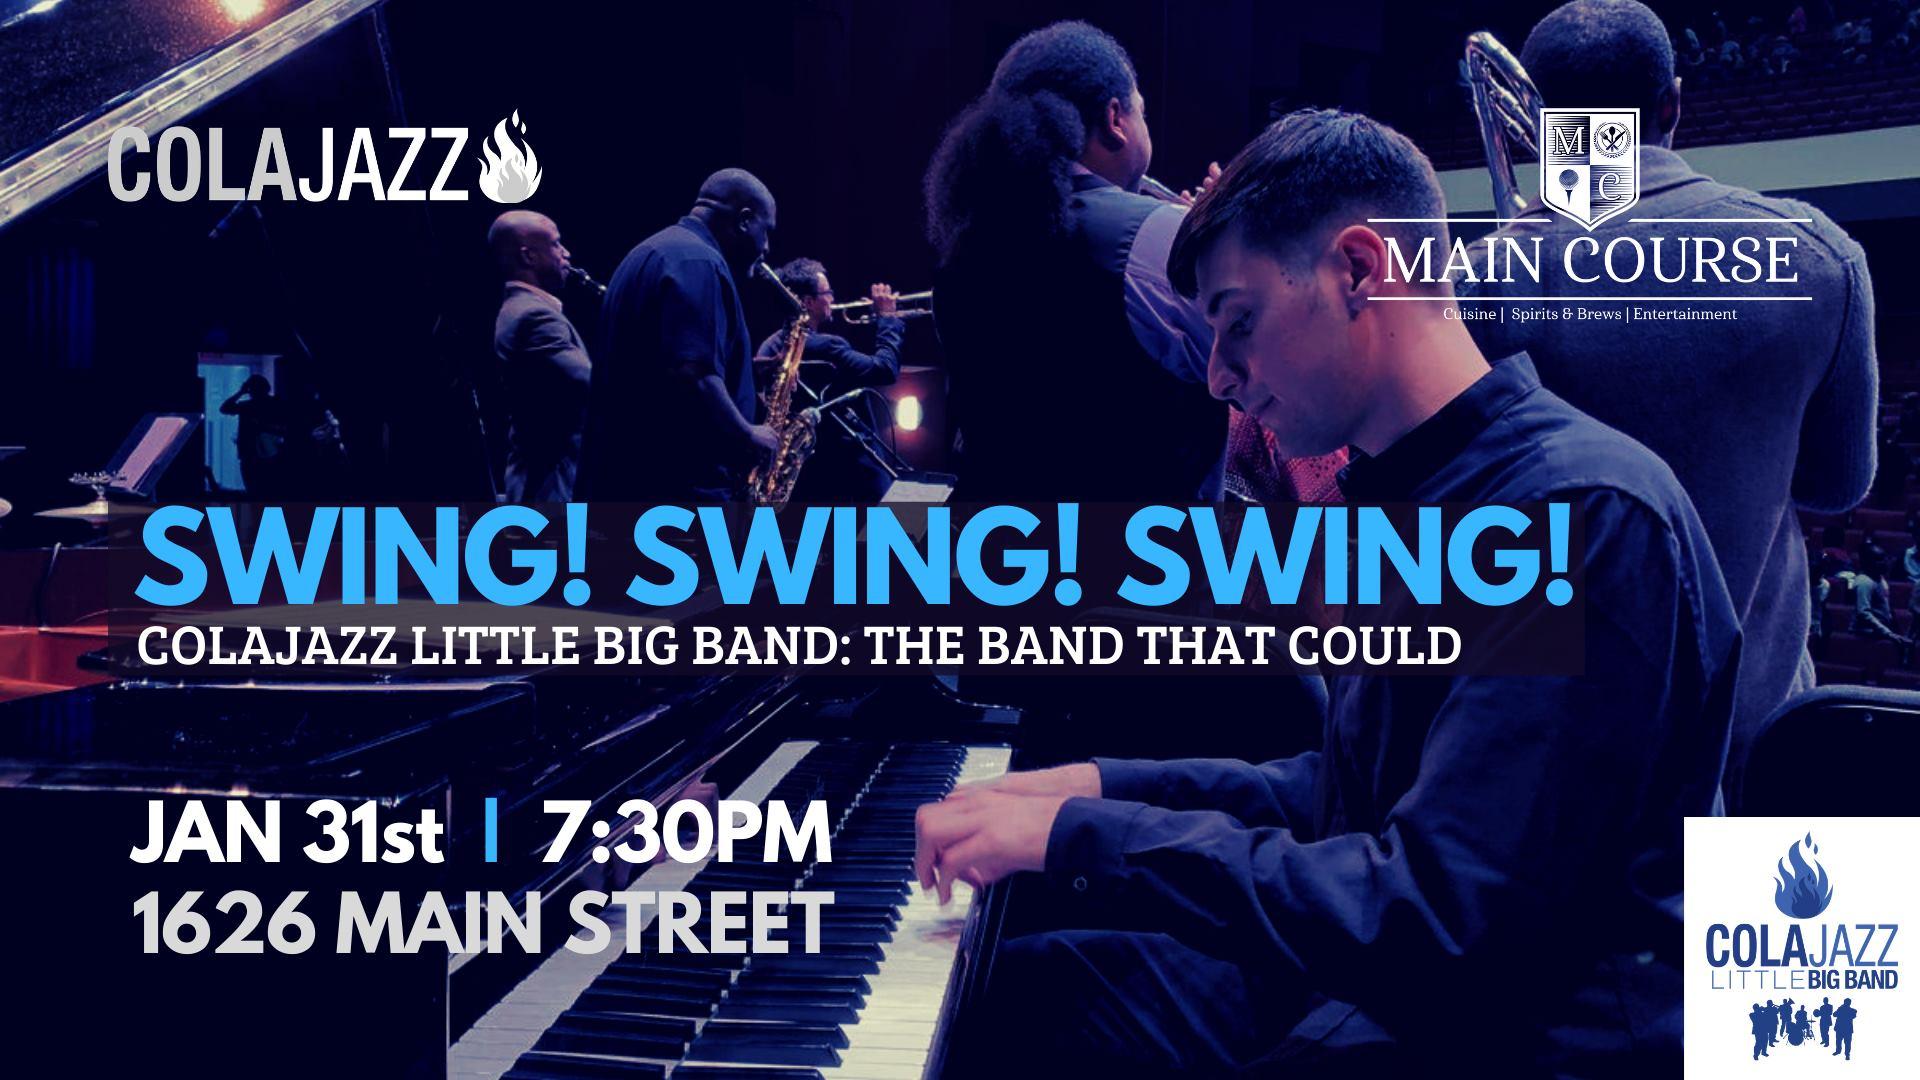 ColaJazz Little Big band: The Band That Could!